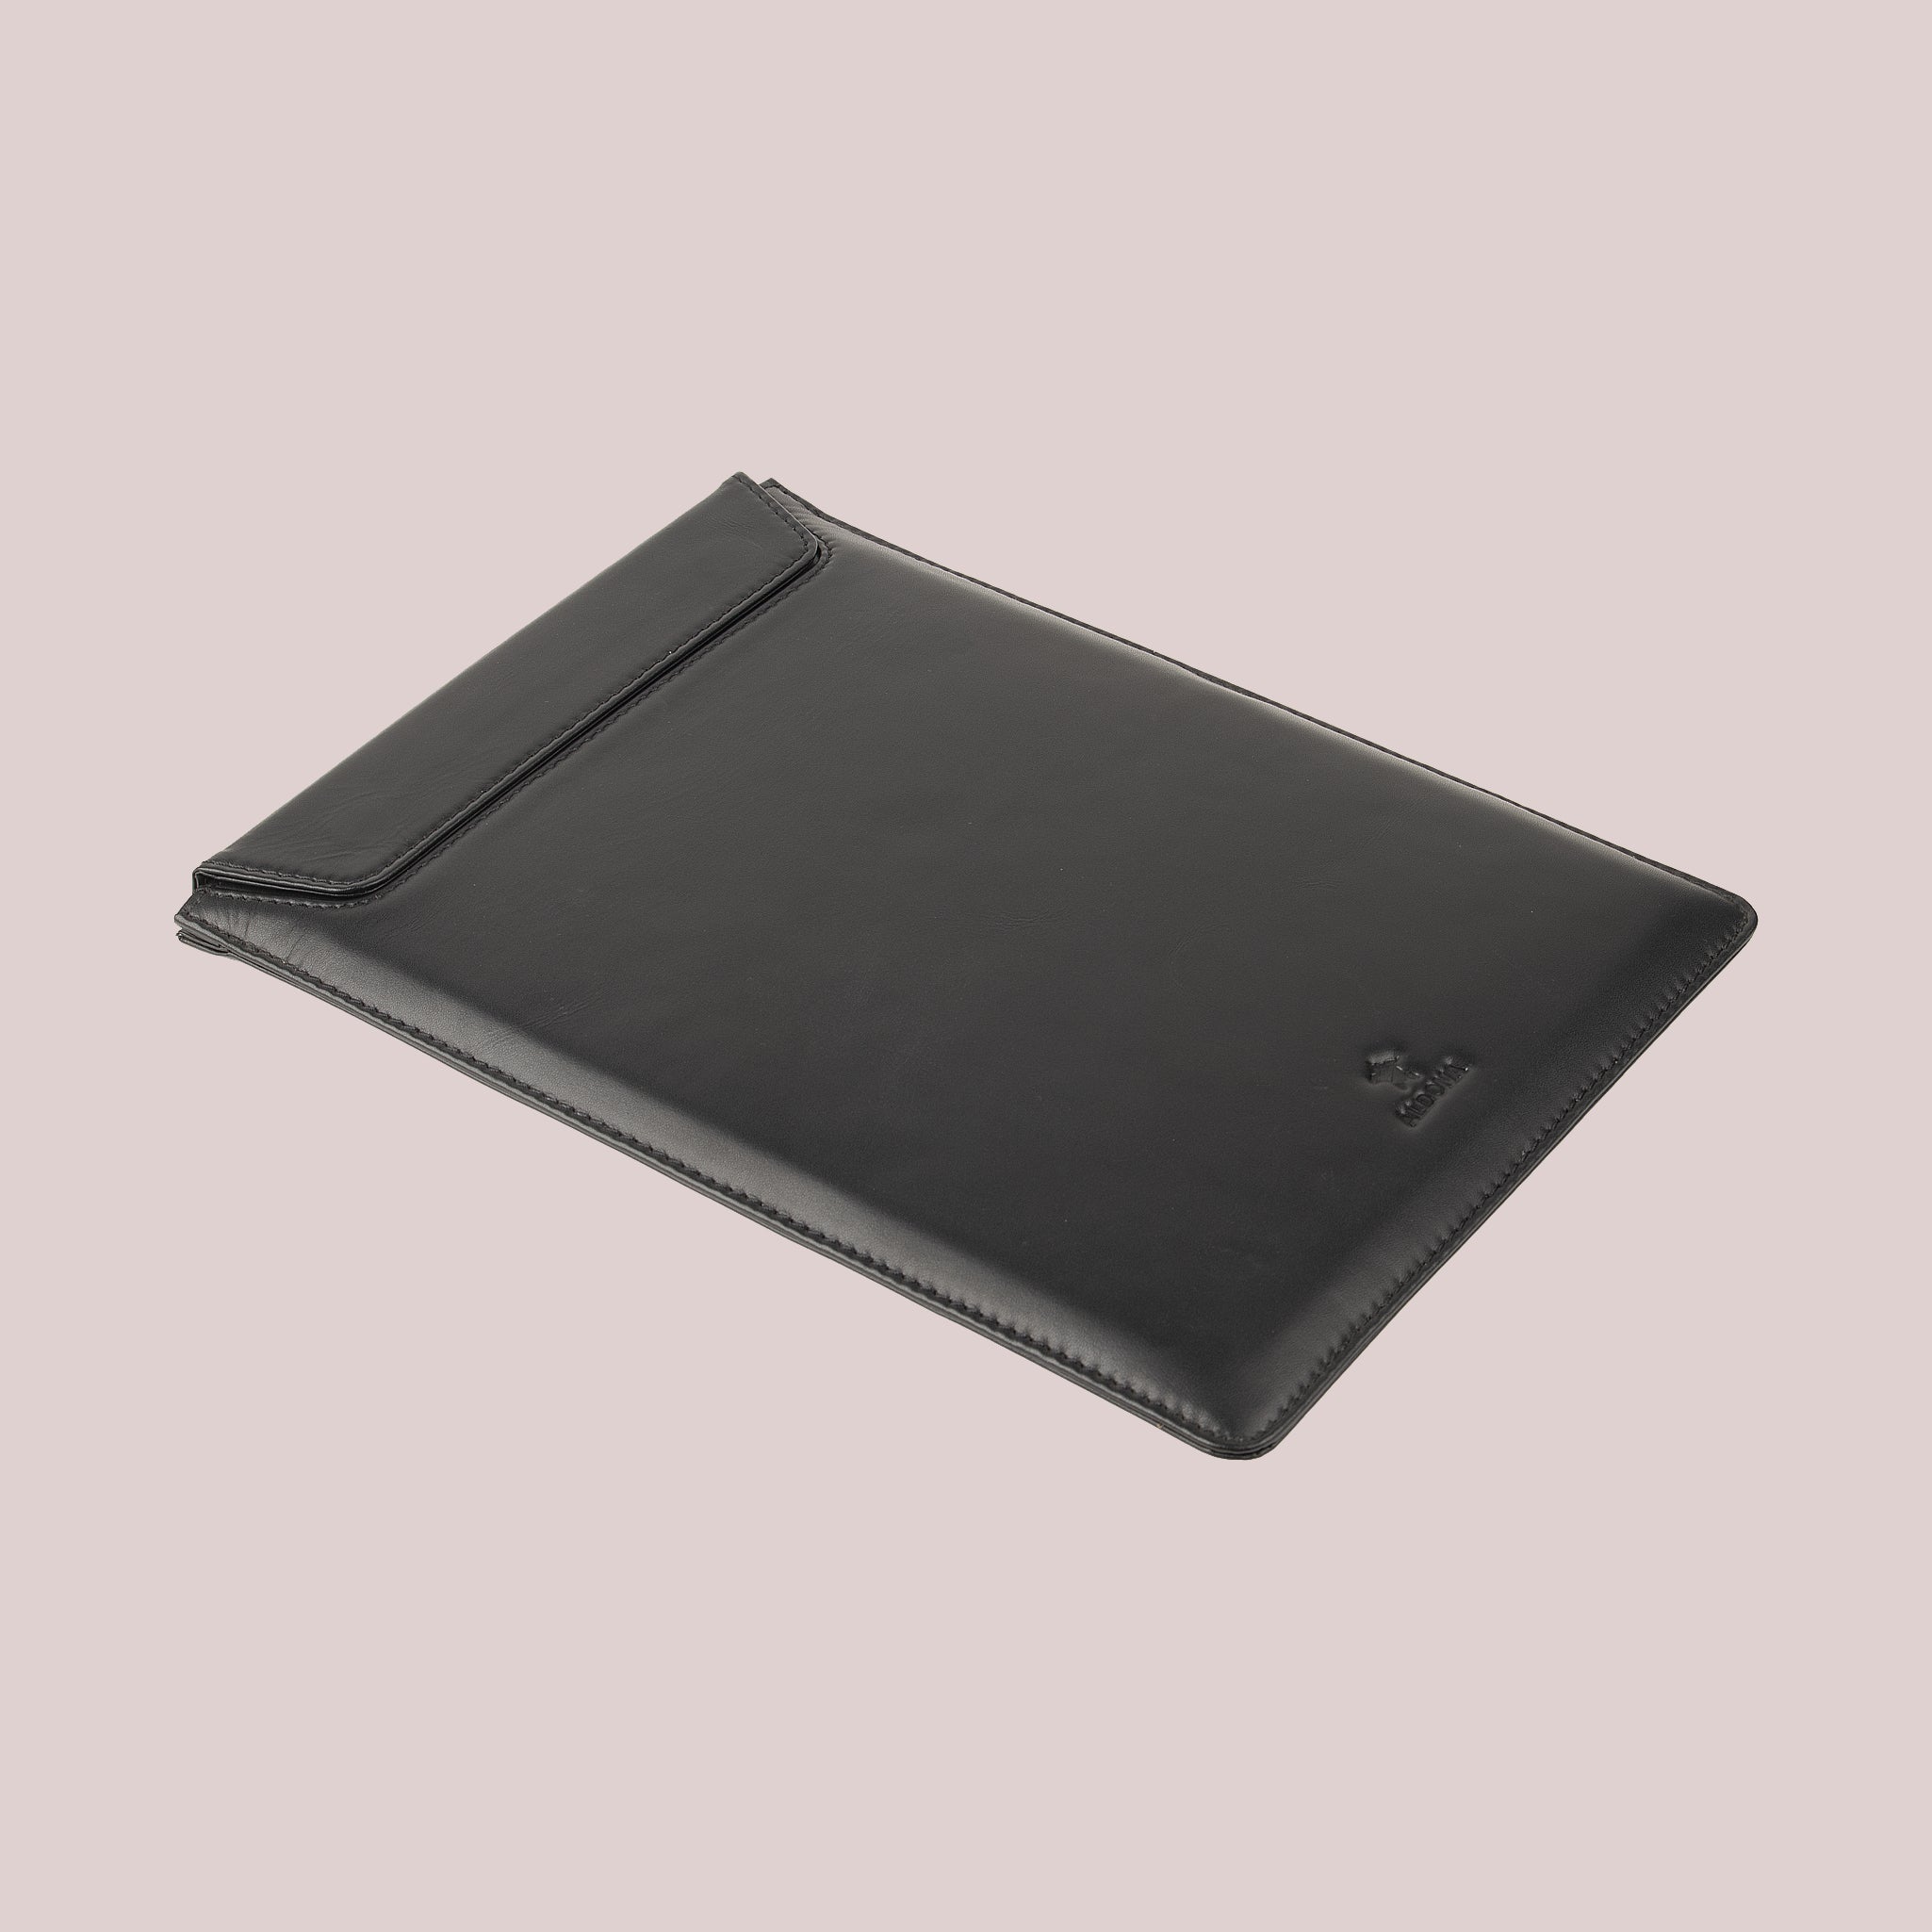 Macbook 16 Pro leather case in a stylish tan color